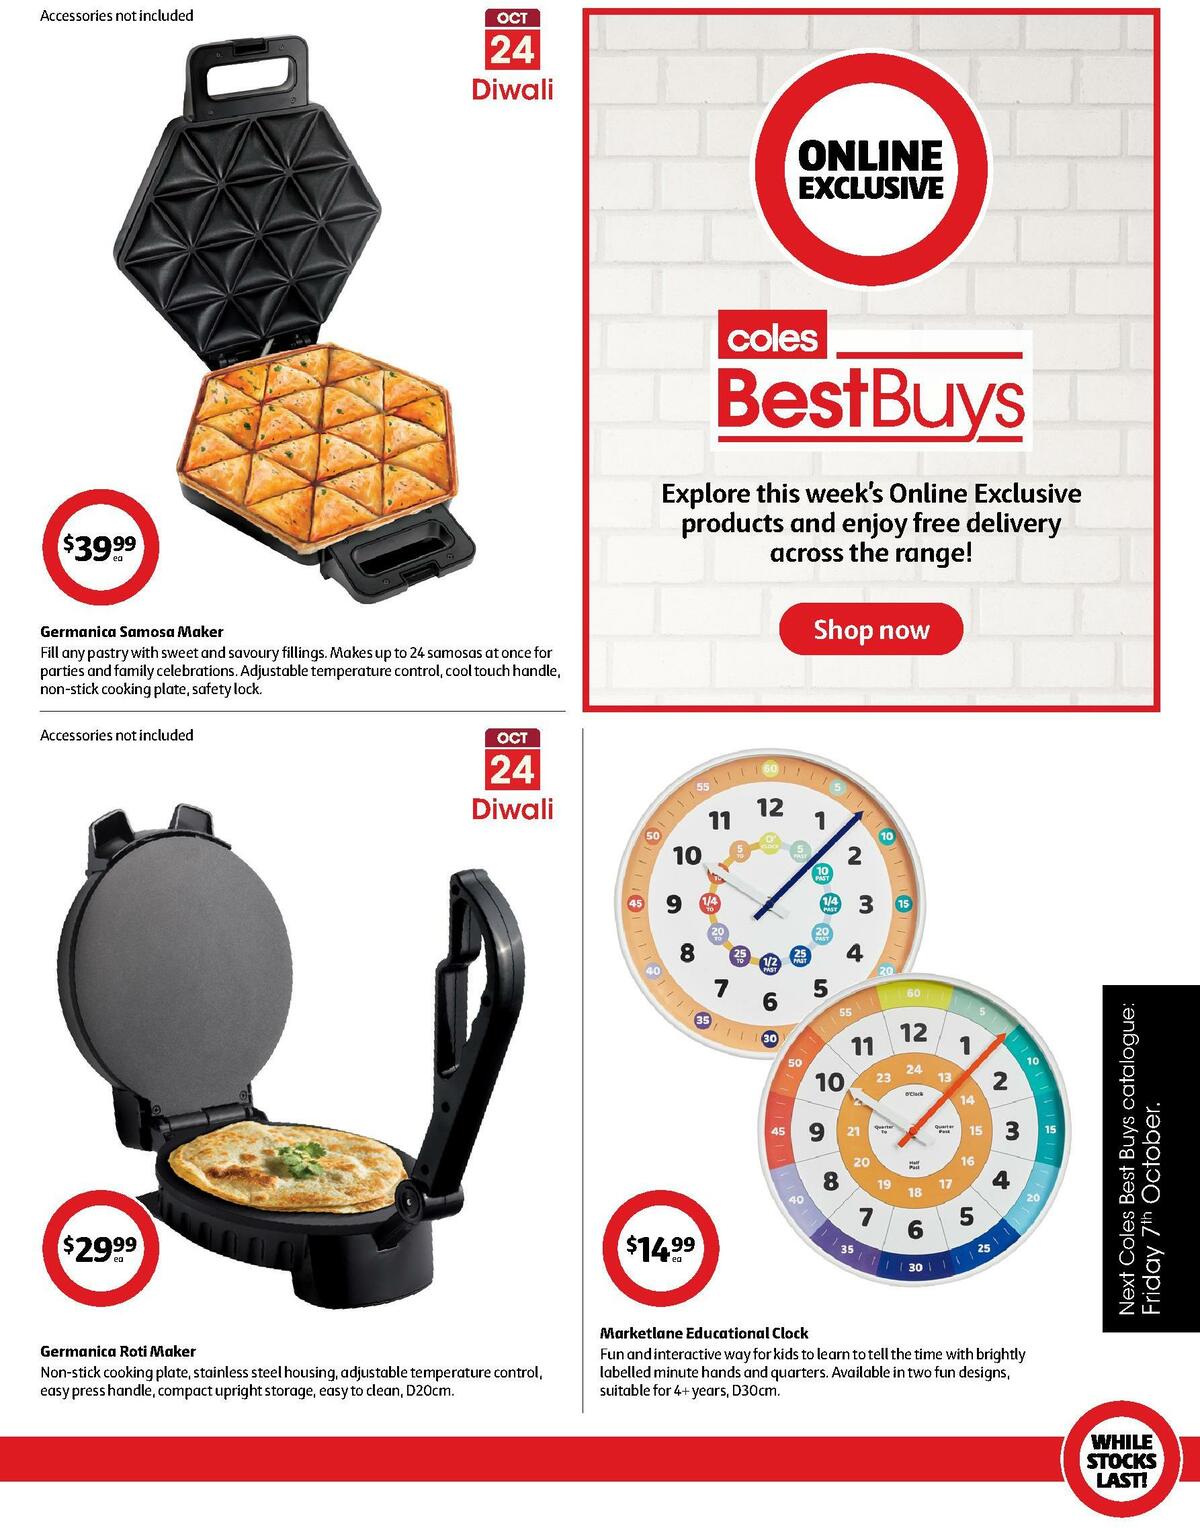 Coles Best Buys - Conscious Home Catalogues from 30 September